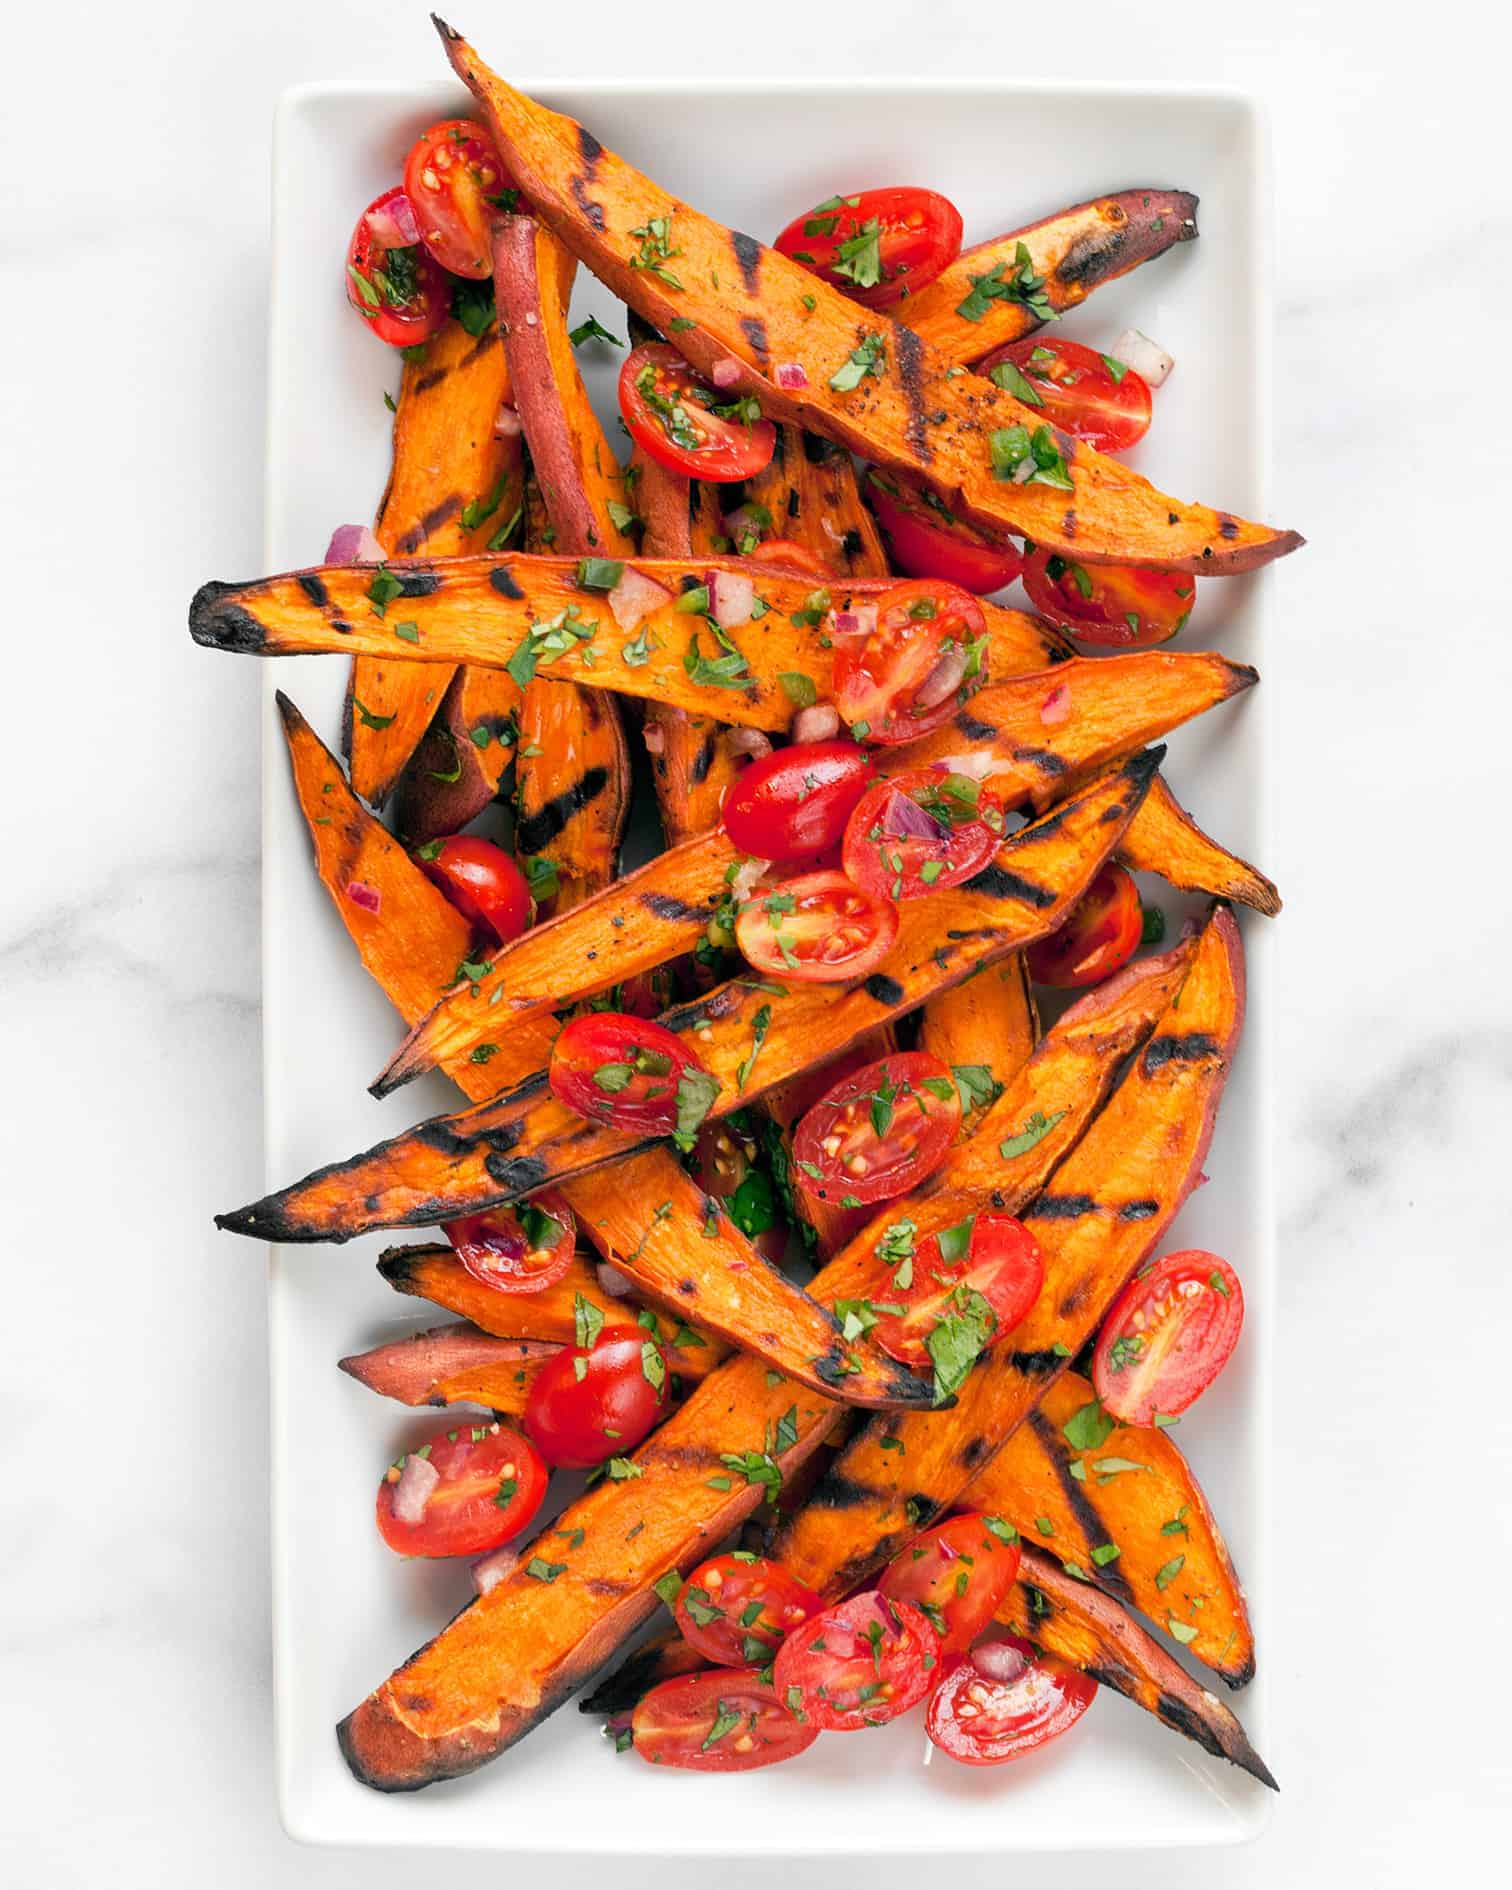 Grilled Sweet Potatoes with Pico de Gallo